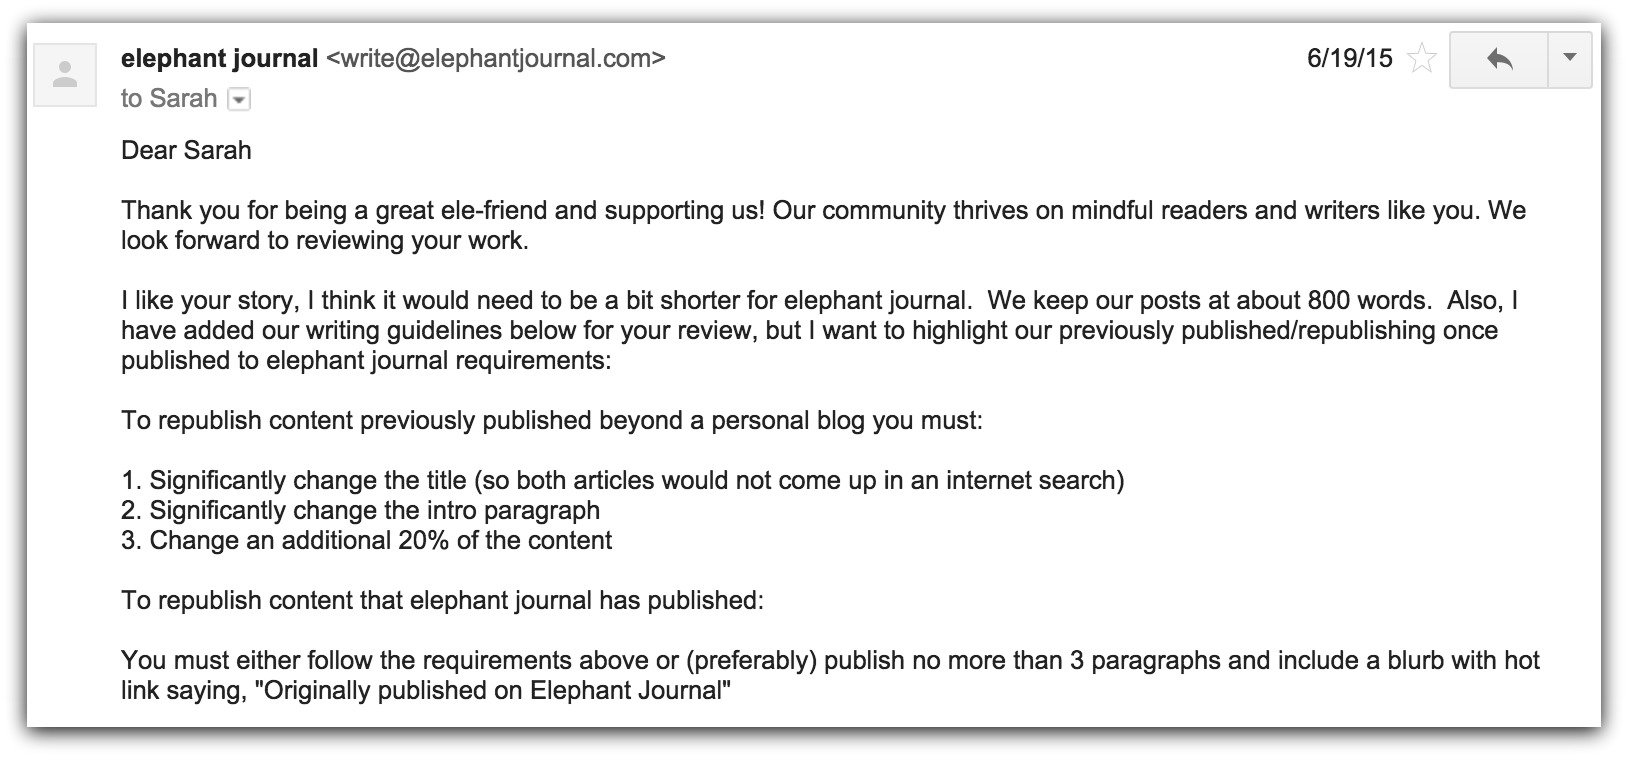 Screenshot showing an email from the elphant journal about republishing